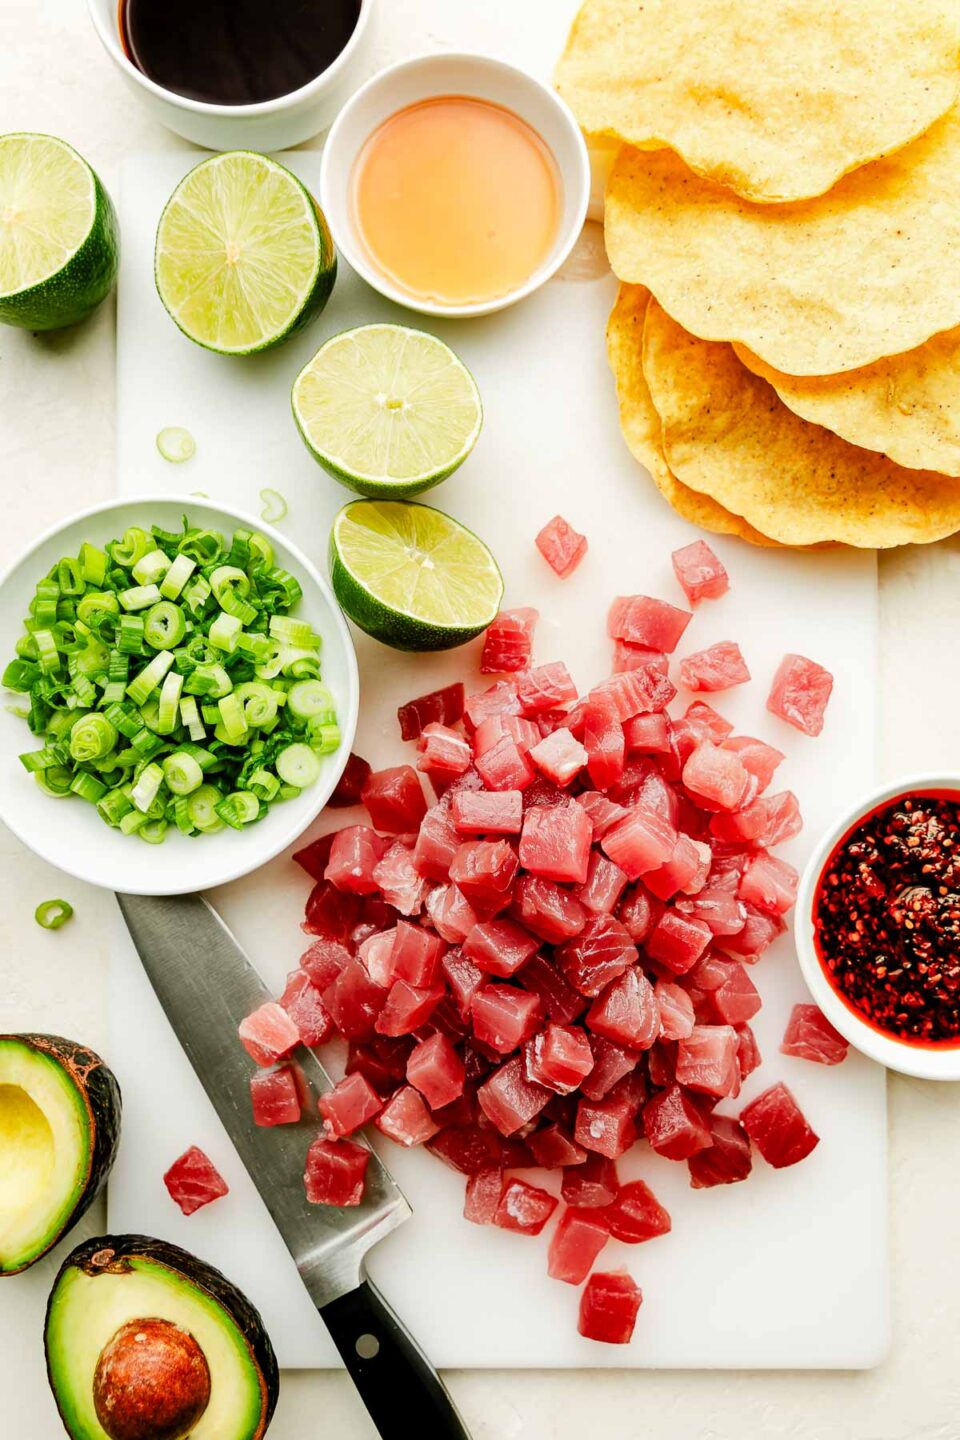 An overhead shot of ingredients arranged on a white cutting board atop a white surface: cubed ahi tuna, tostada shells, halved limes, halved avocado, green onions, soy sauce, sesame oil, and chili crisp.